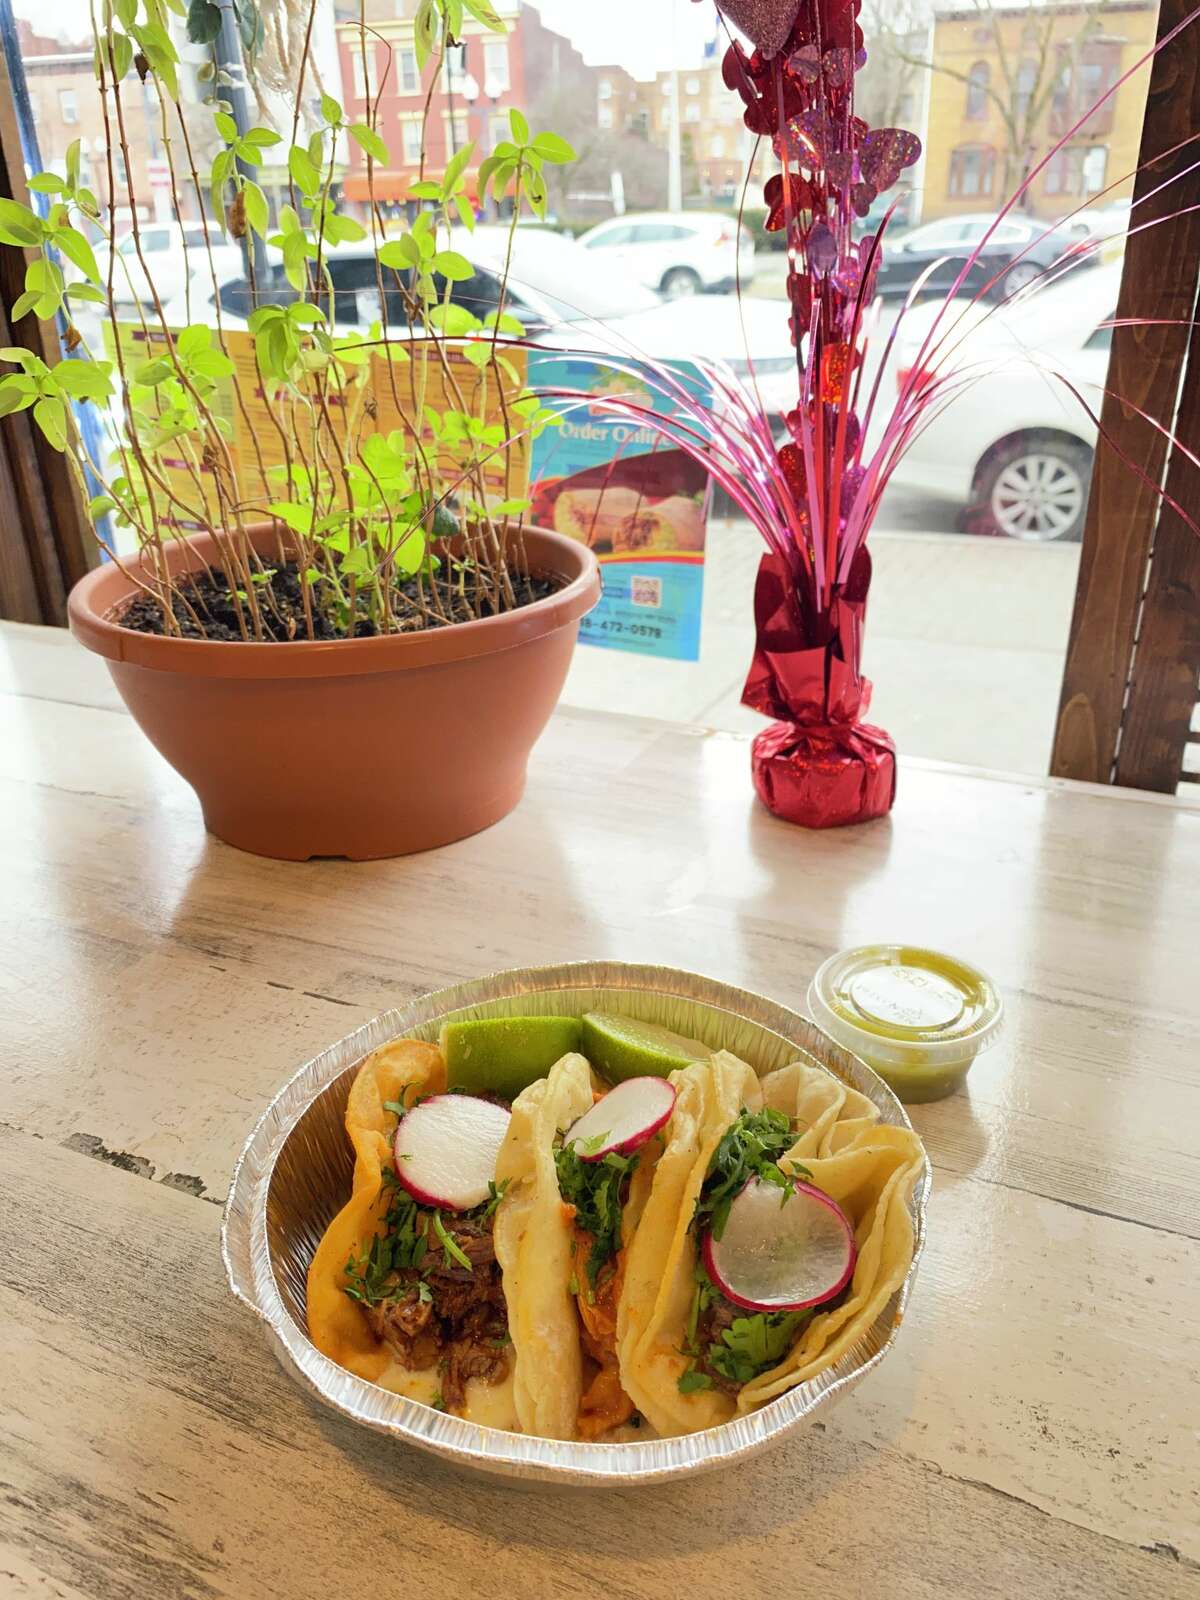 Three tacos in a tin foil tray sit on a wood table. A green plant and pink decoration can be seen in front of the window, looking out toward traffic.